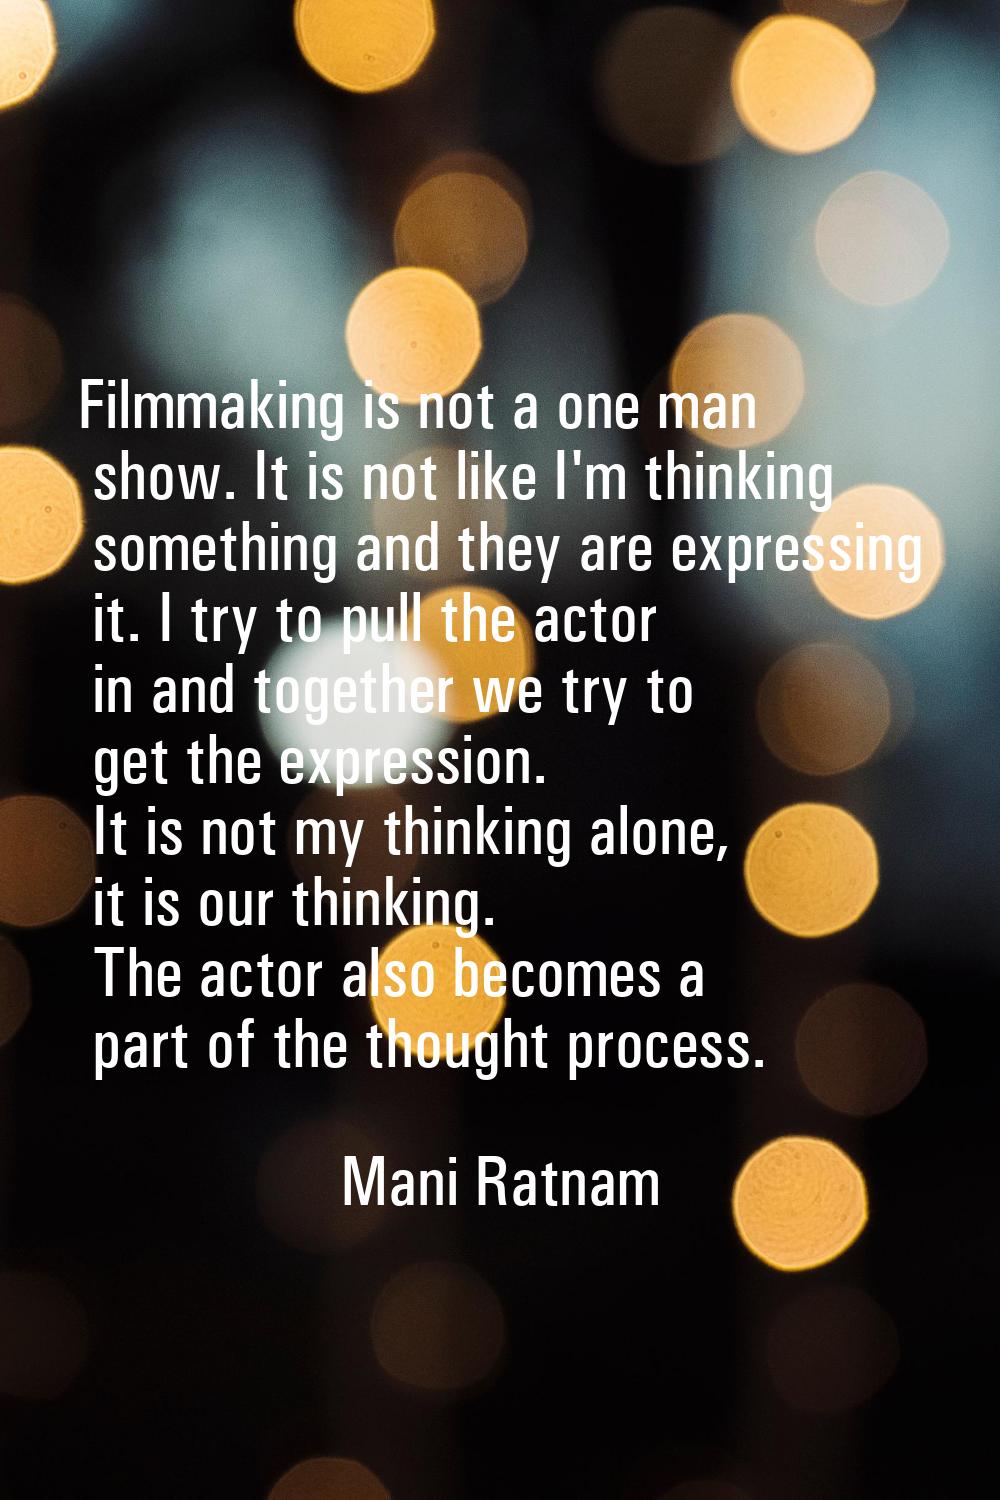 Filmmaking is not a one man show. It is not like I'm thinking something and they are expressing it.